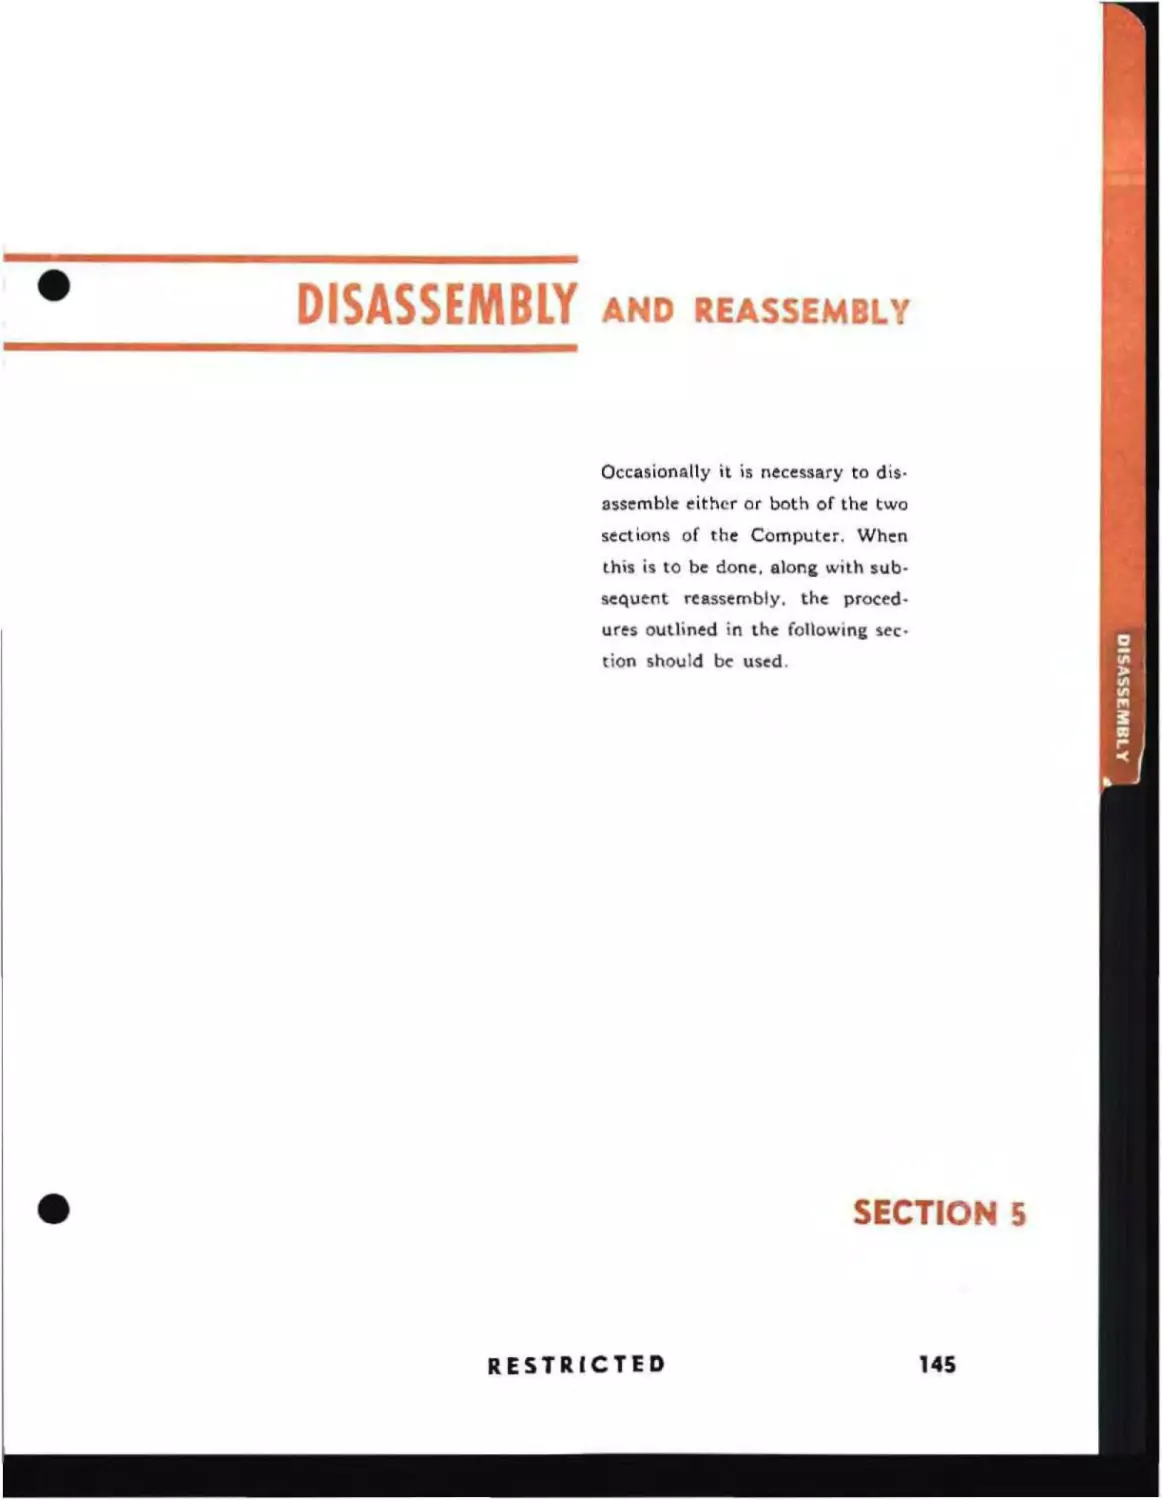 Page 145, Disassembly and Reassembly